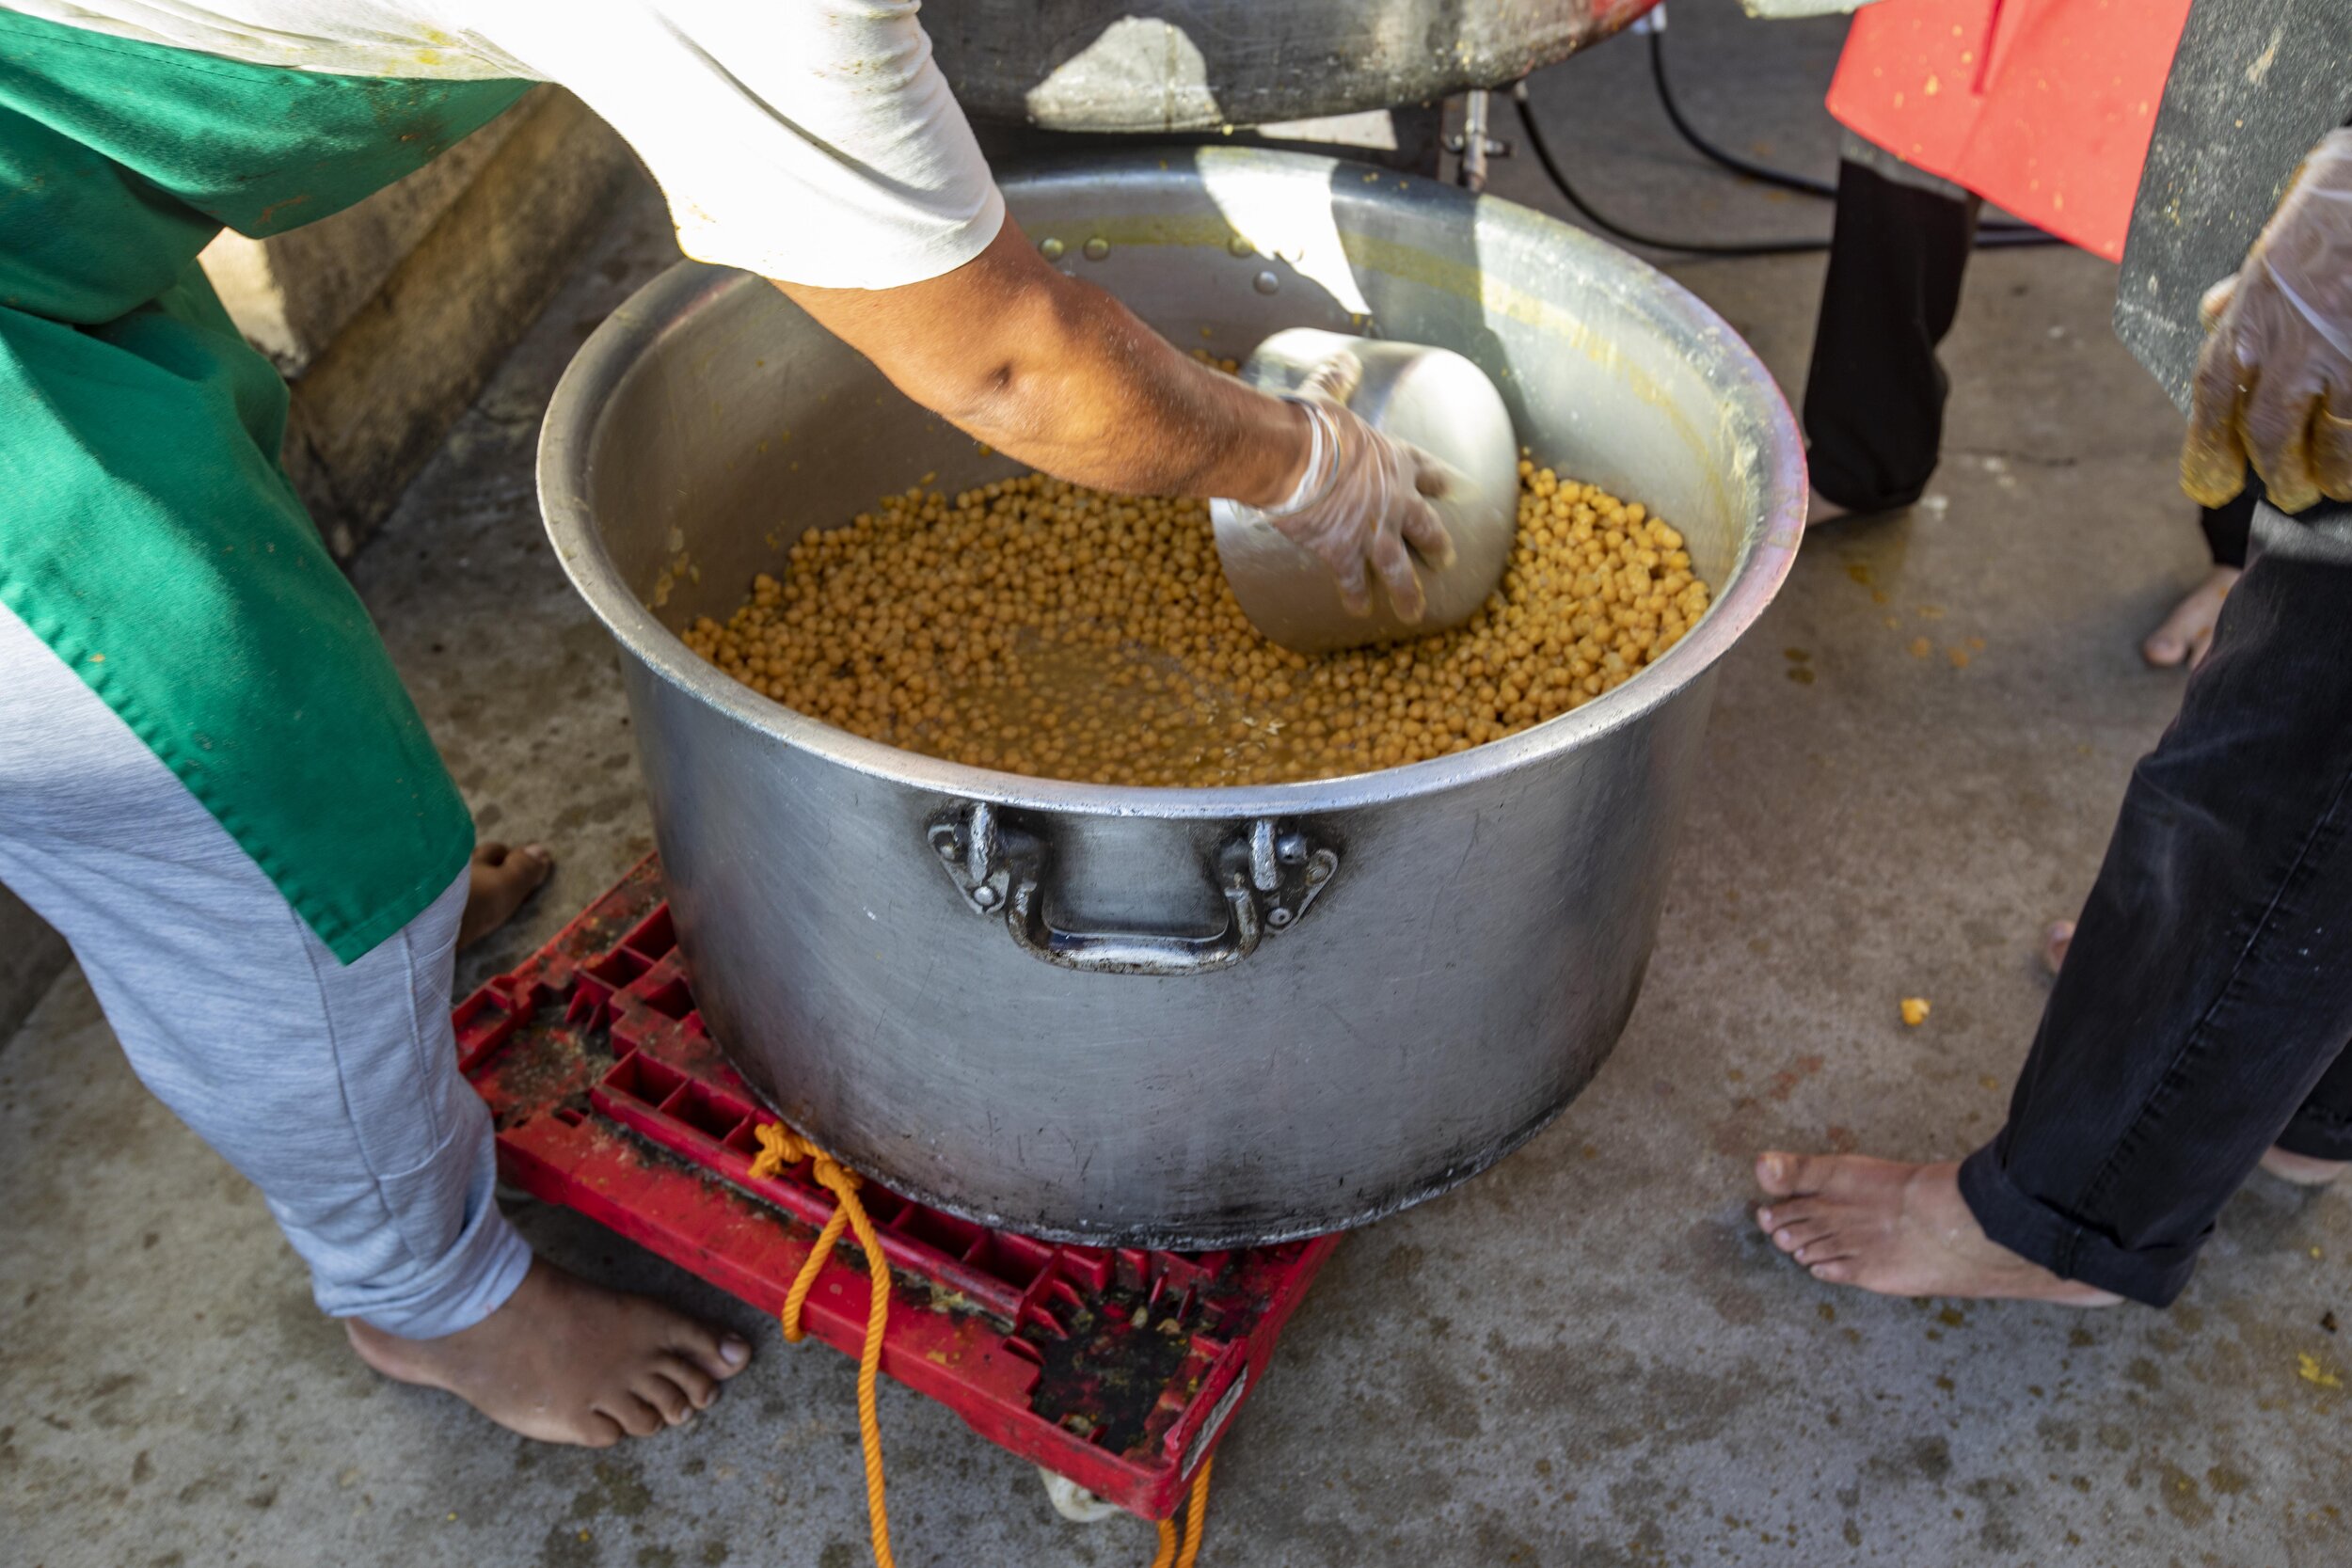  Volunteers add chickpeas to a pot at Khalsa Care Foundation. The Sikh community is working with the mayor's office and Department on Disability and making 3,000 meals daily. They have 50-55 volunteers that show up Monday through Friday to make meals